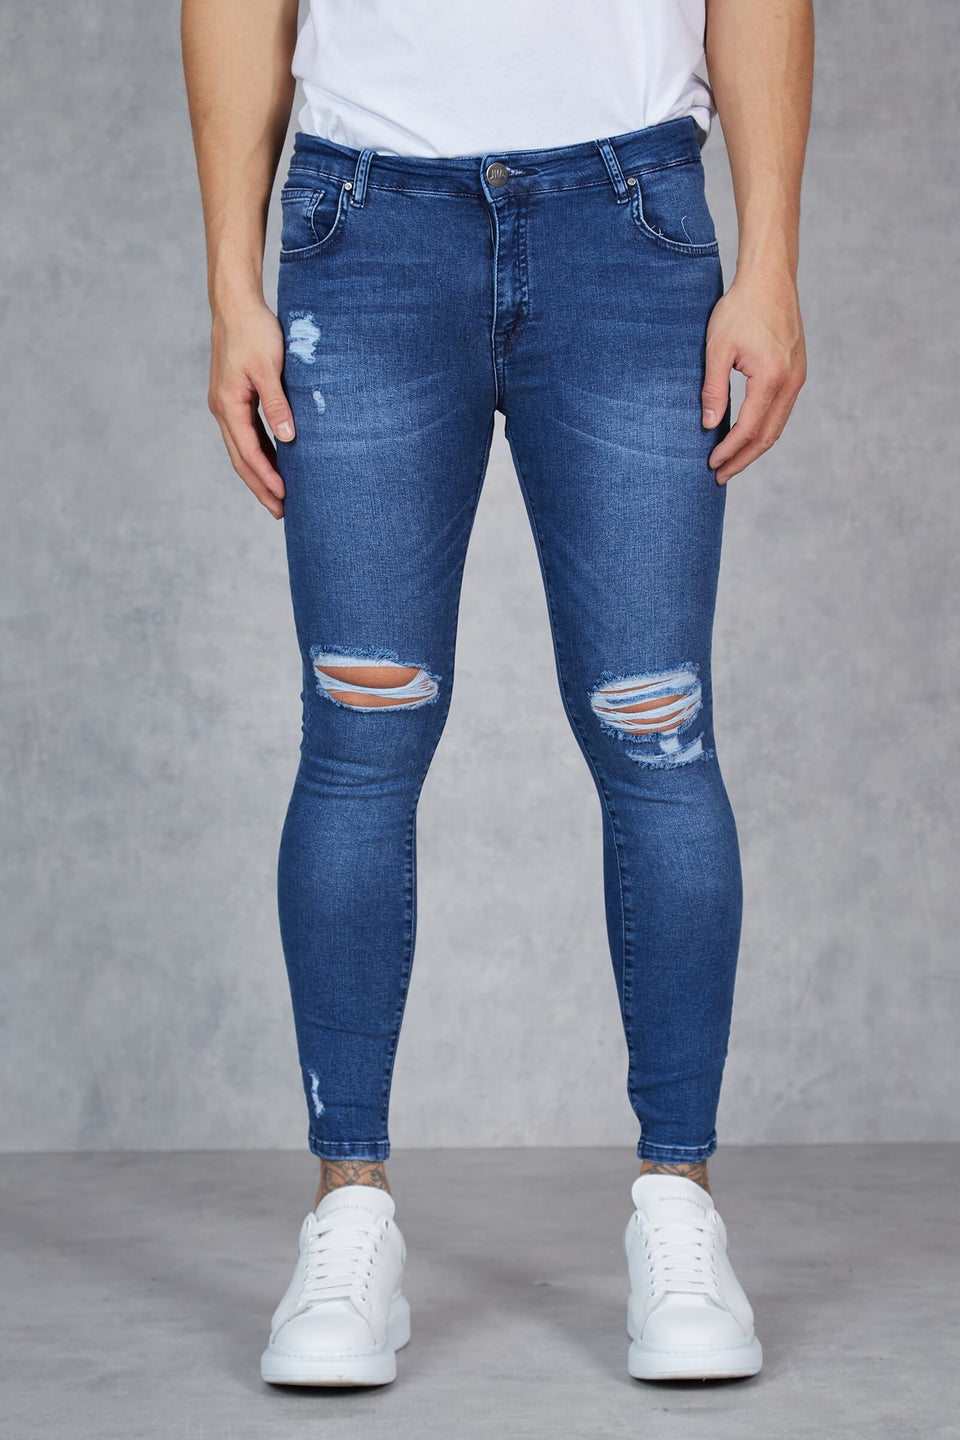 F1 - Luther Knee Rip Super Spray On Skinny Jeans - Blue